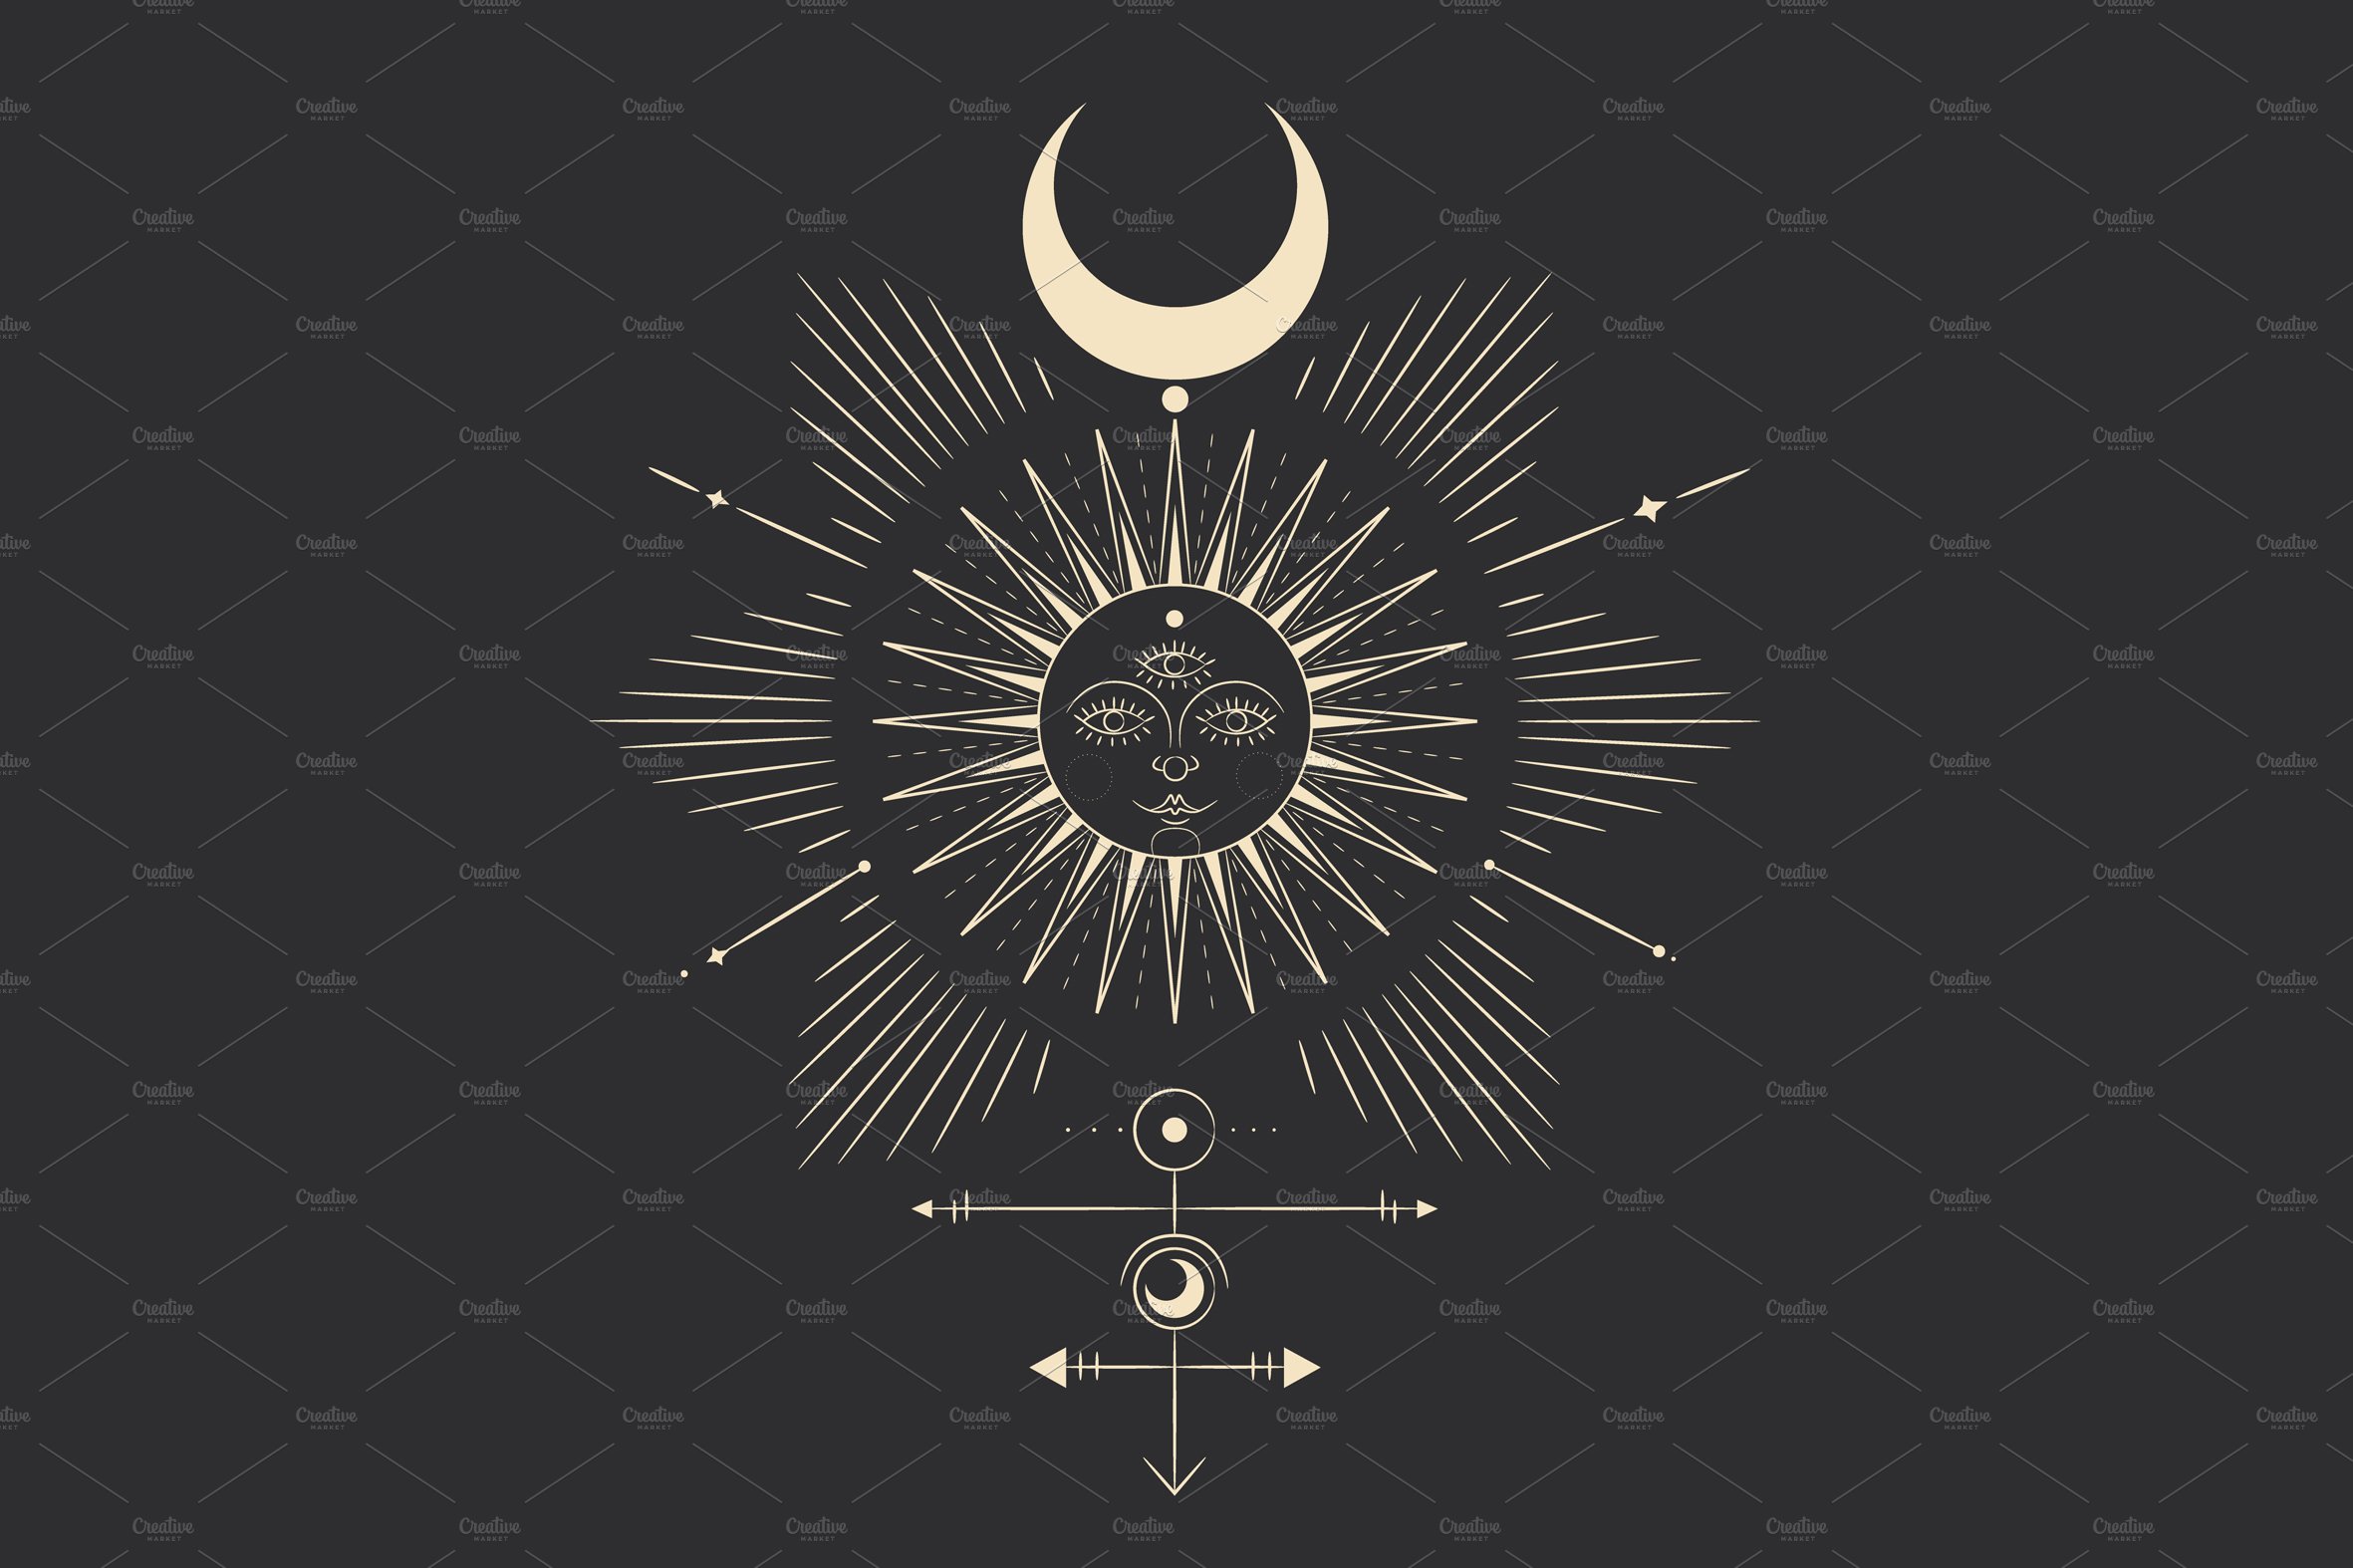 Cosmic signs and symbols preview image.